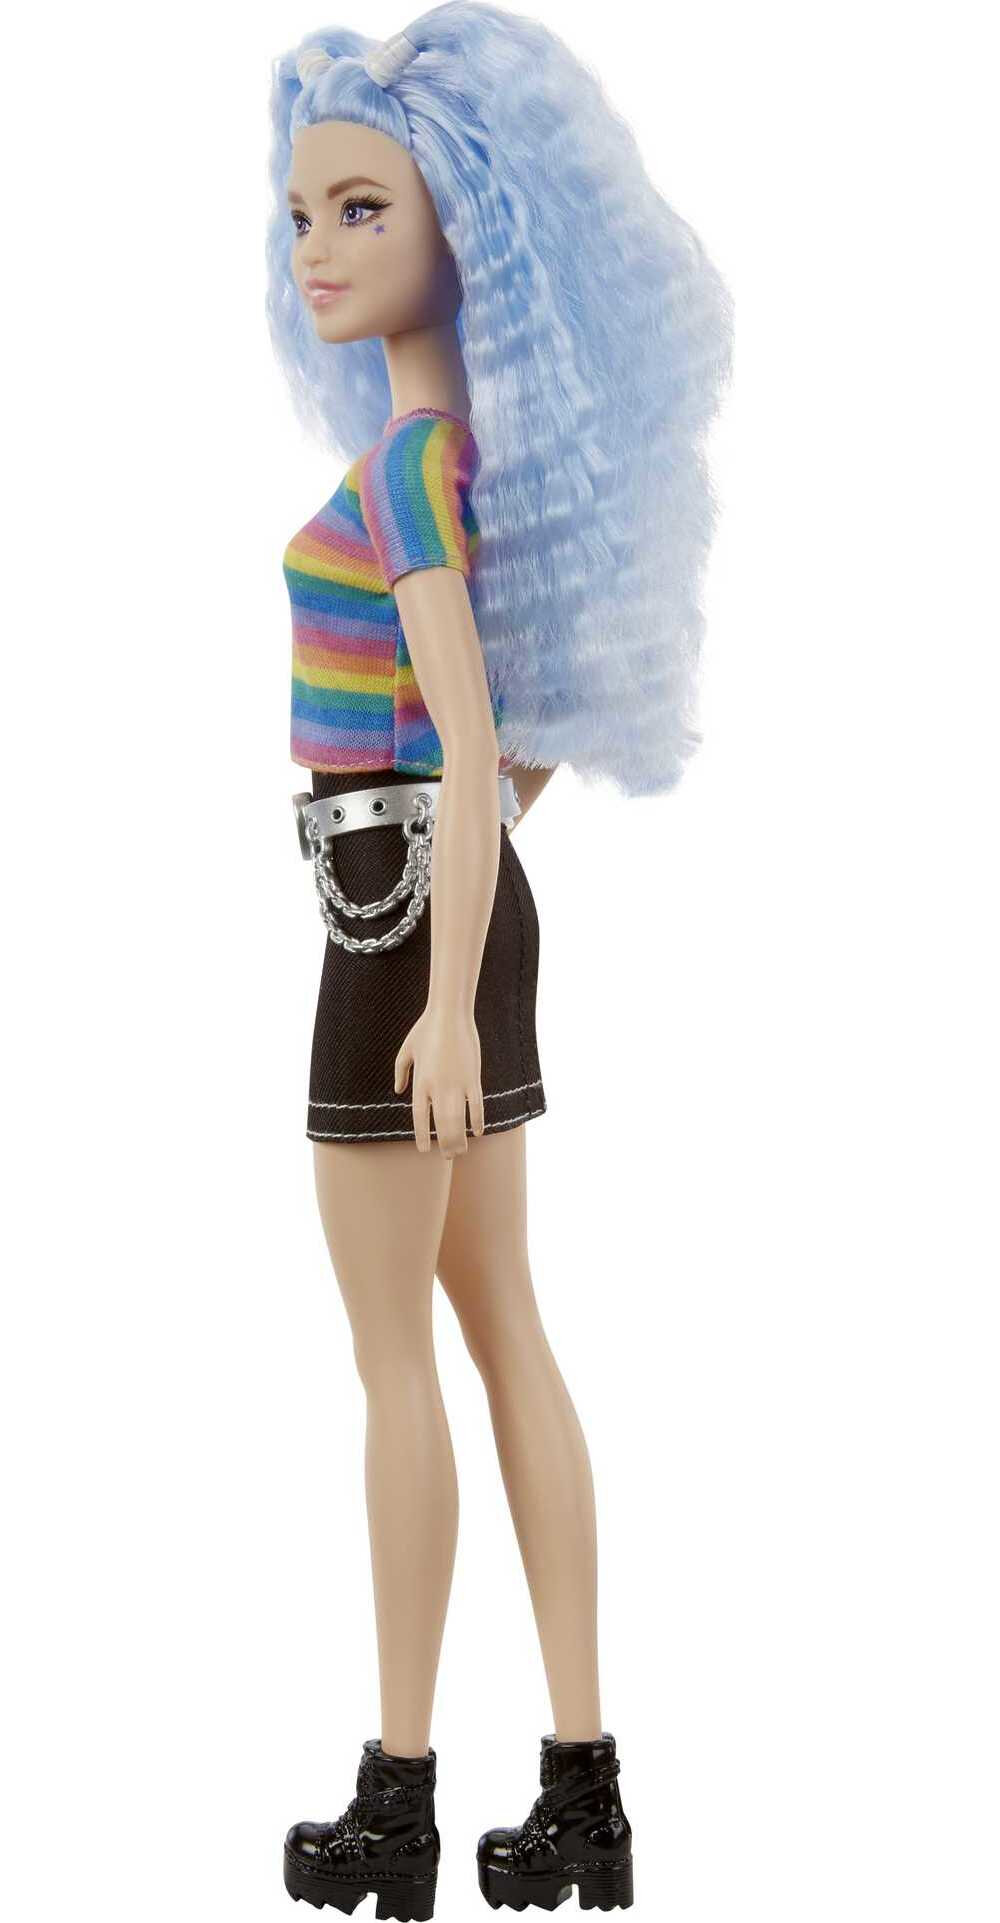 Barbie Fashionistas Doll #170 with Long Blue Crimped Hair, Star Face Makeup in Striped Tee - image 4 of 7